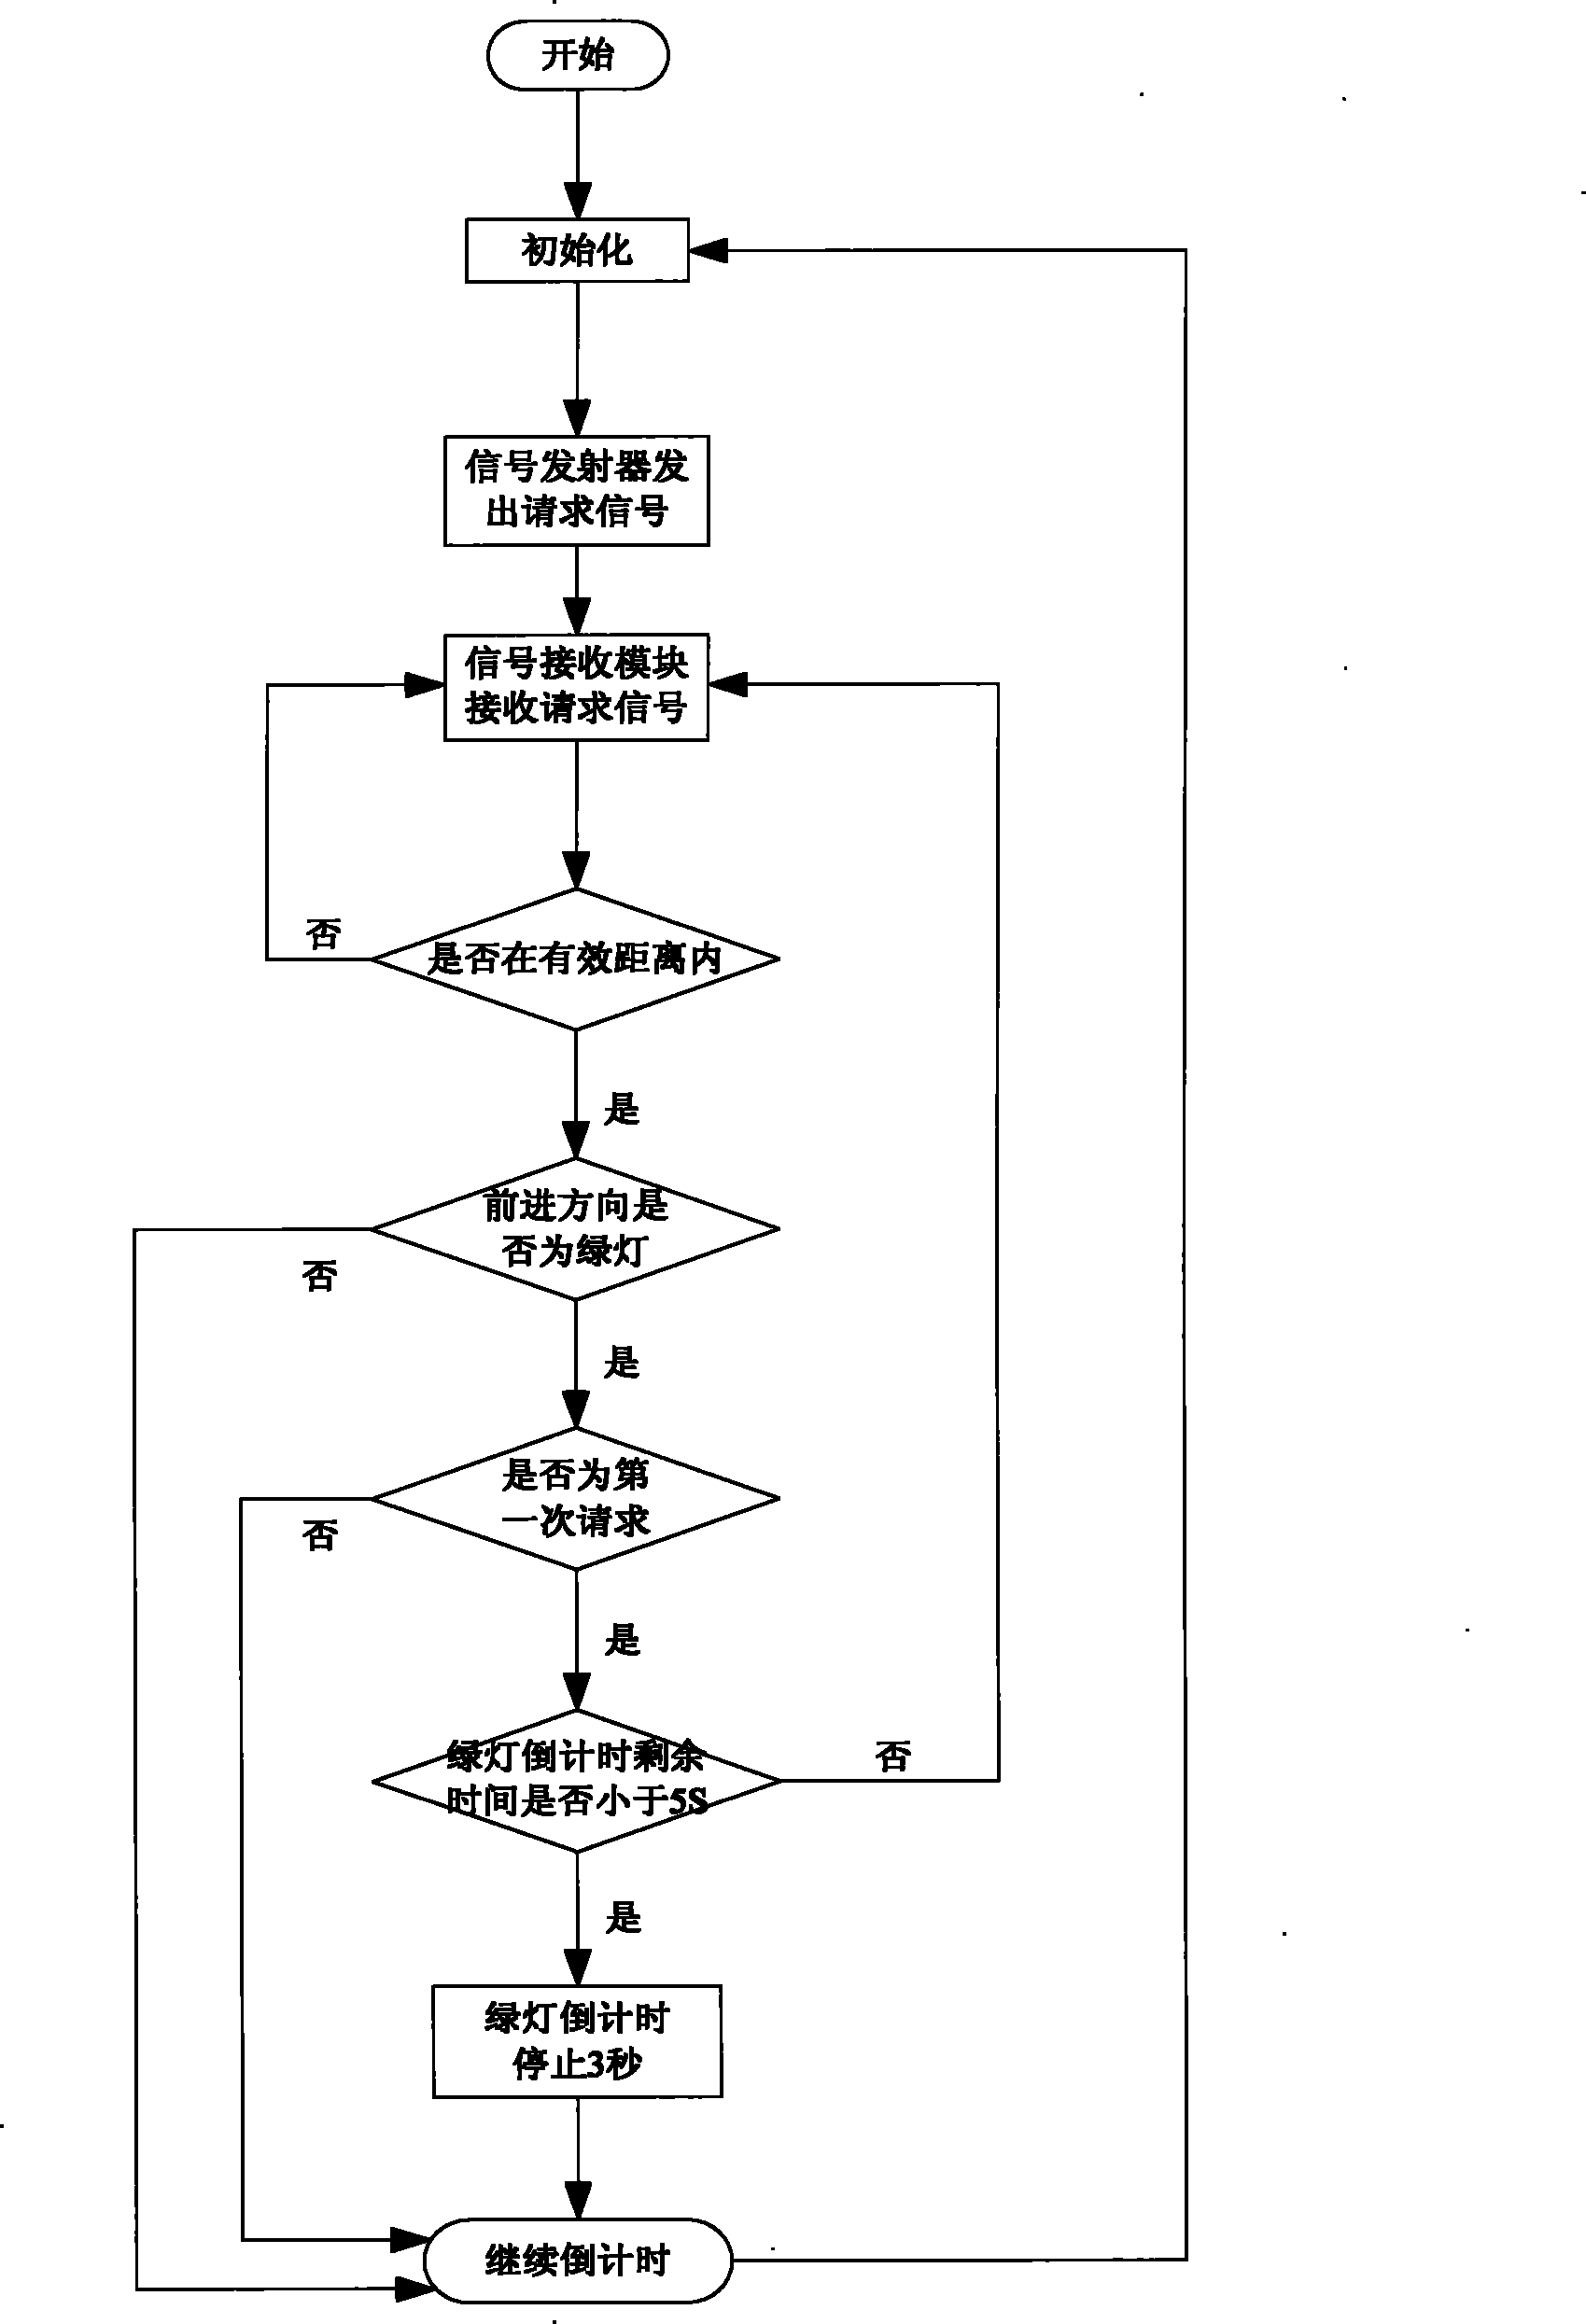 Device and method for controlling public transport vehicle to pass through crossroad